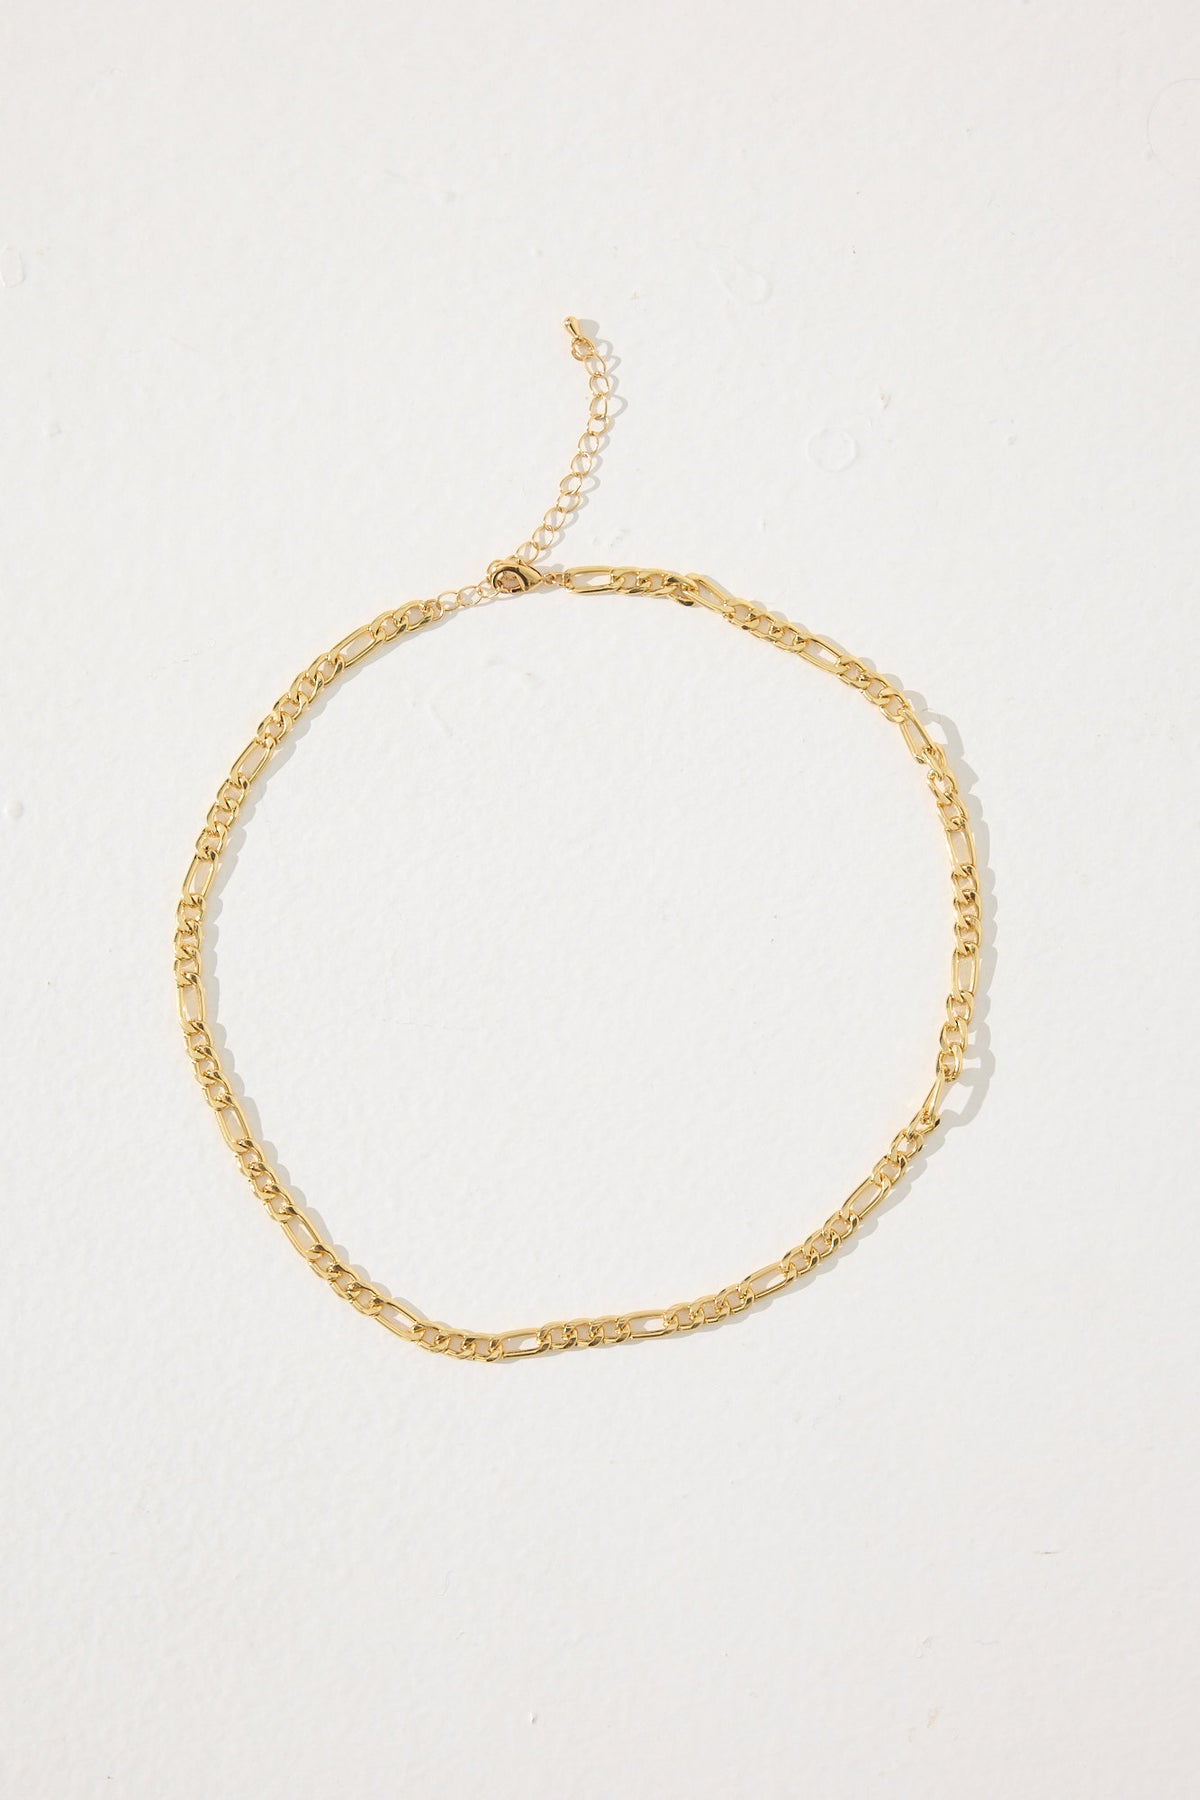 Maje Figaro Necklace Gold Plated